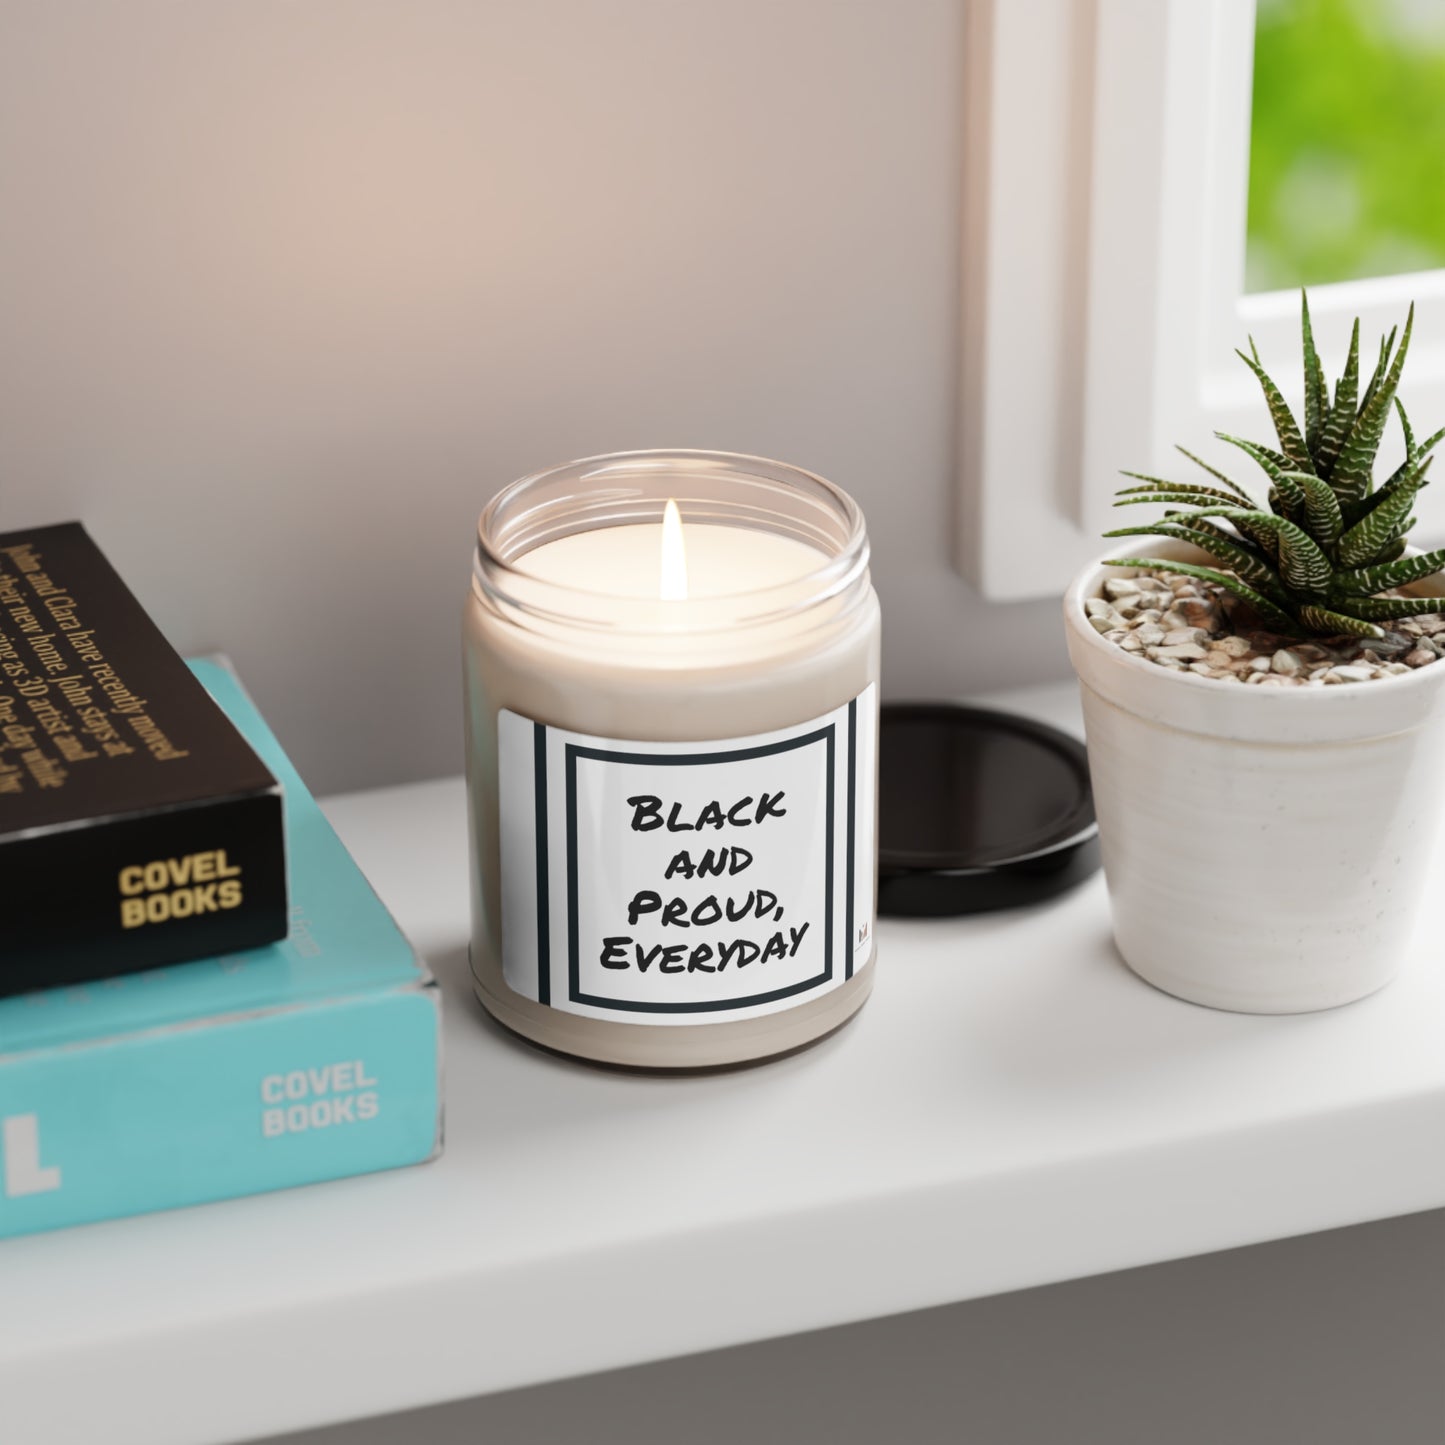 "Black and Proud" Scented Soy Candle, 9oz